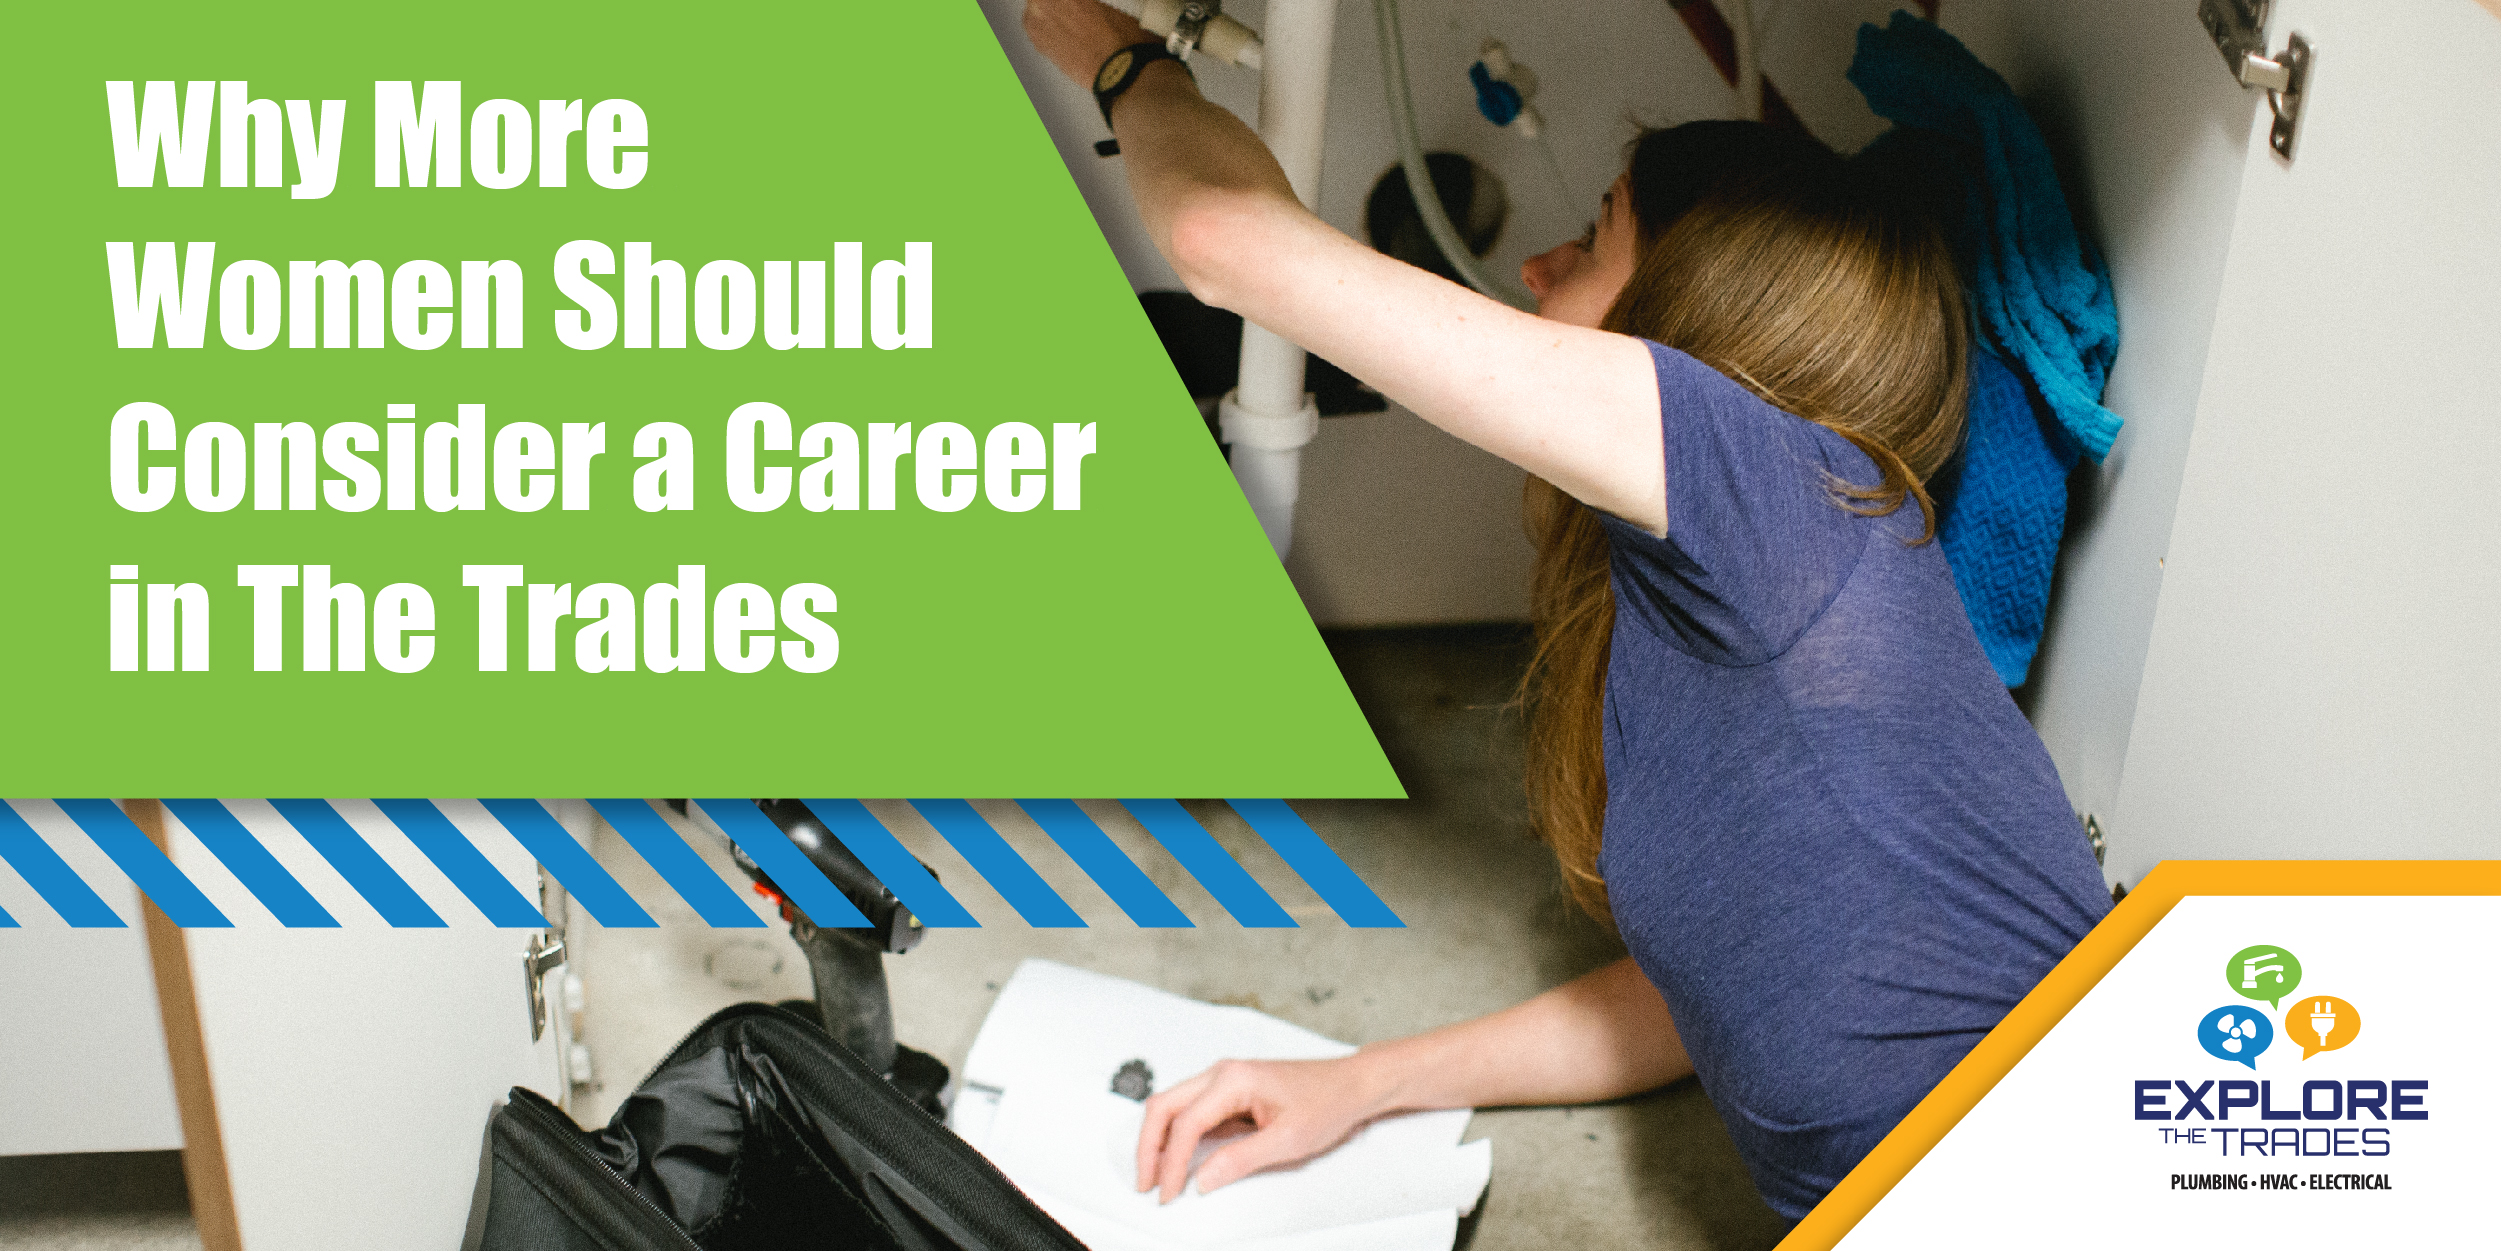 Why More Women Should Consider a Career in the Trades featured image